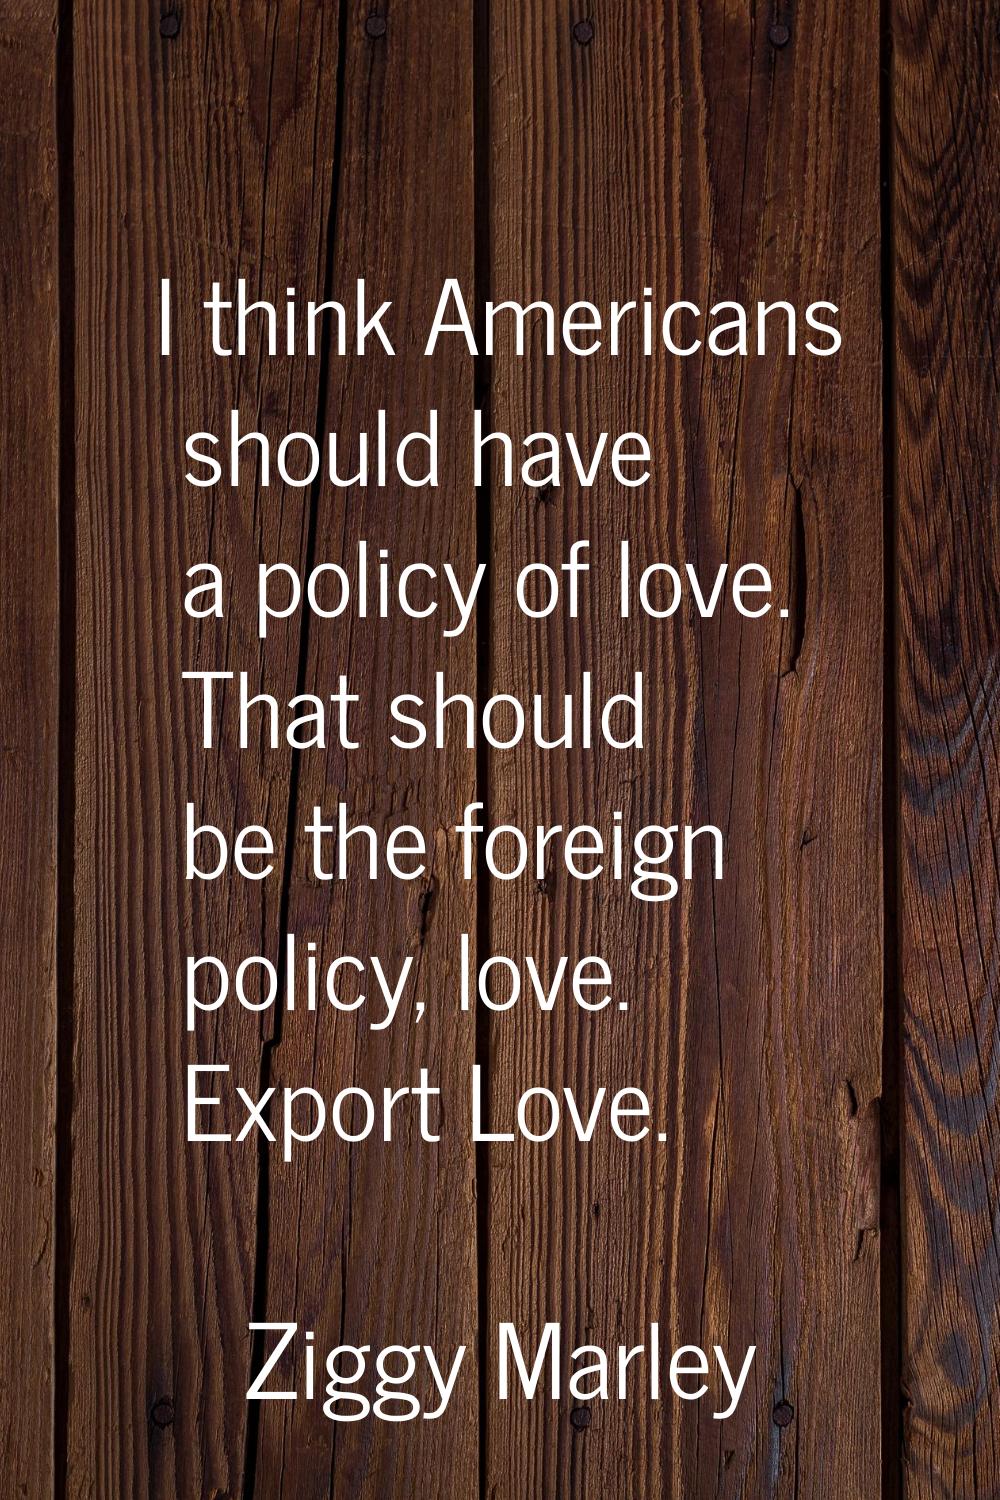 I think Americans should have a policy of love. That should be the foreign policy, love. Export Lov